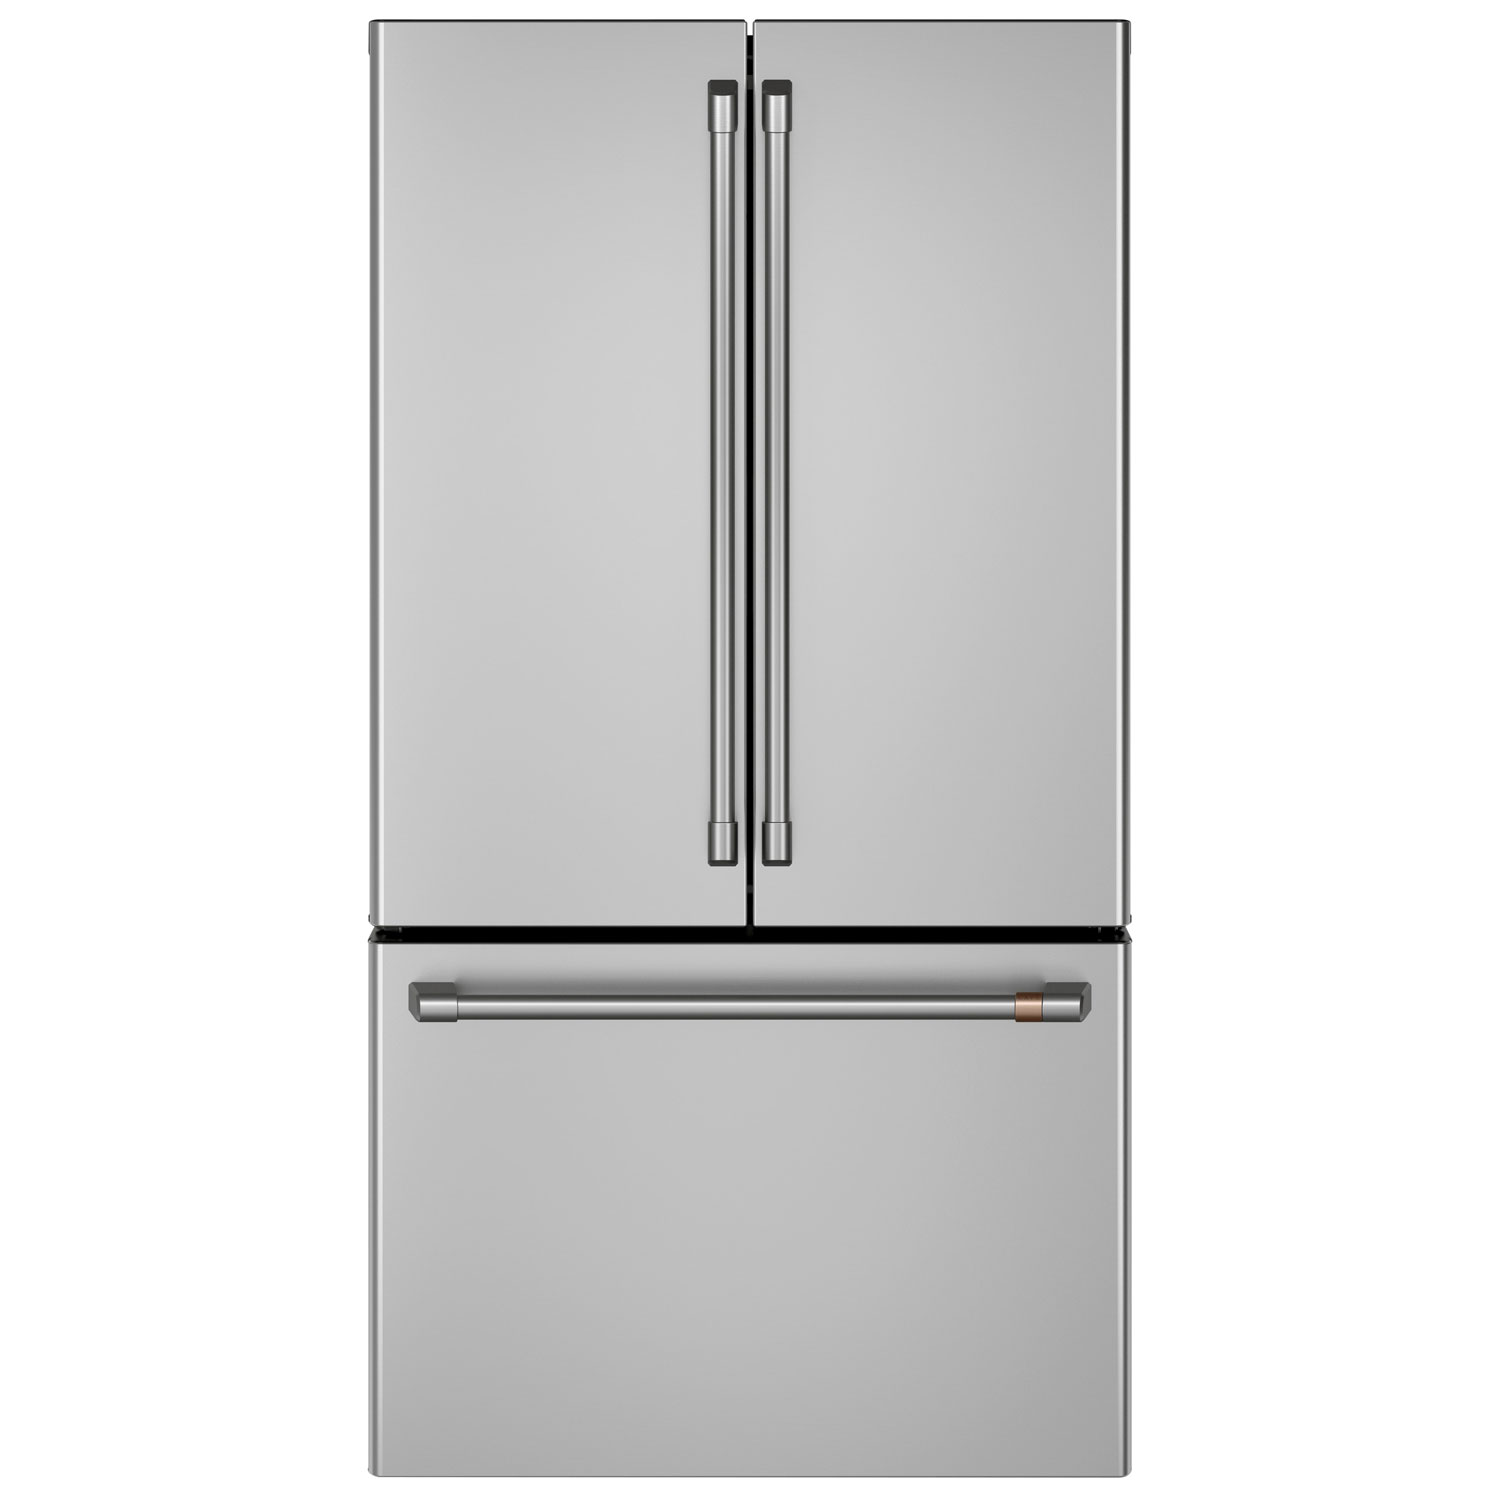 Café 36" 23.1 Cu. Ft. Counter-Depth French Door Refrigerator (CWE23SP2MS1) - Stainless Steel